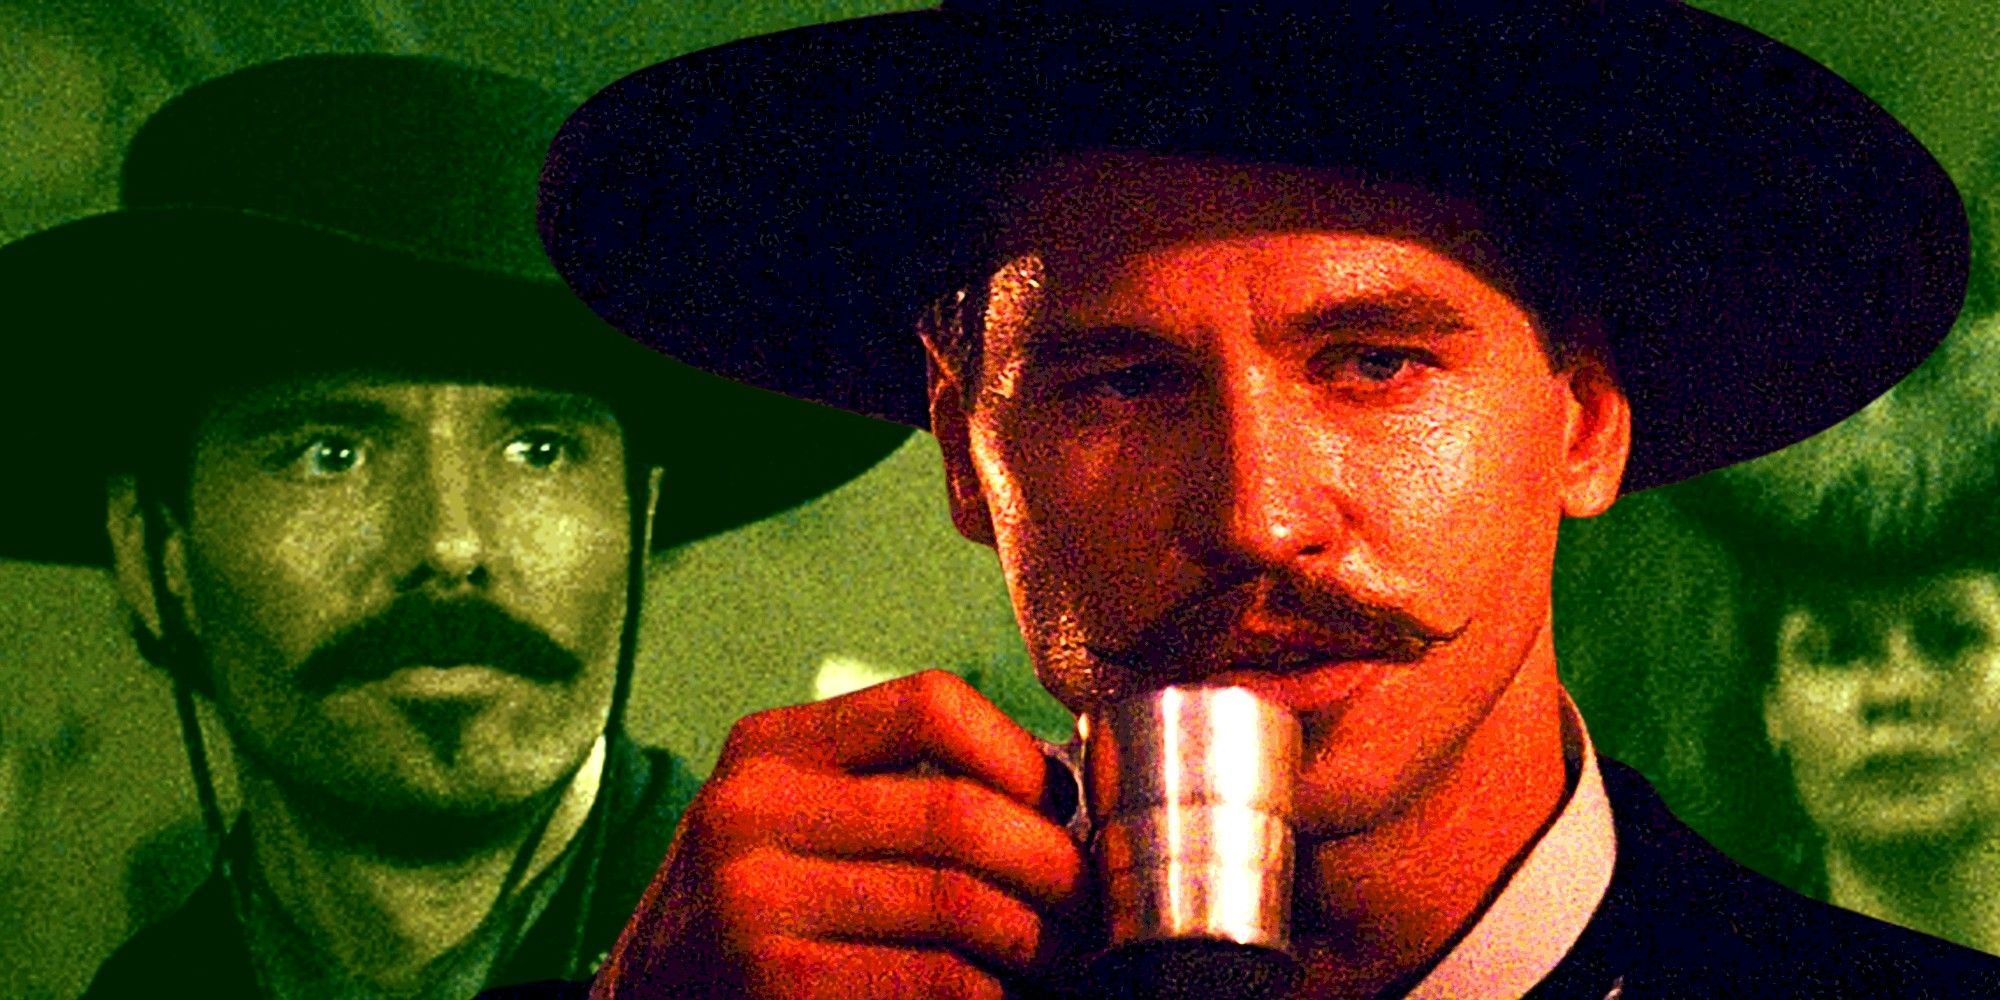 doc holliday does this mean were not friends